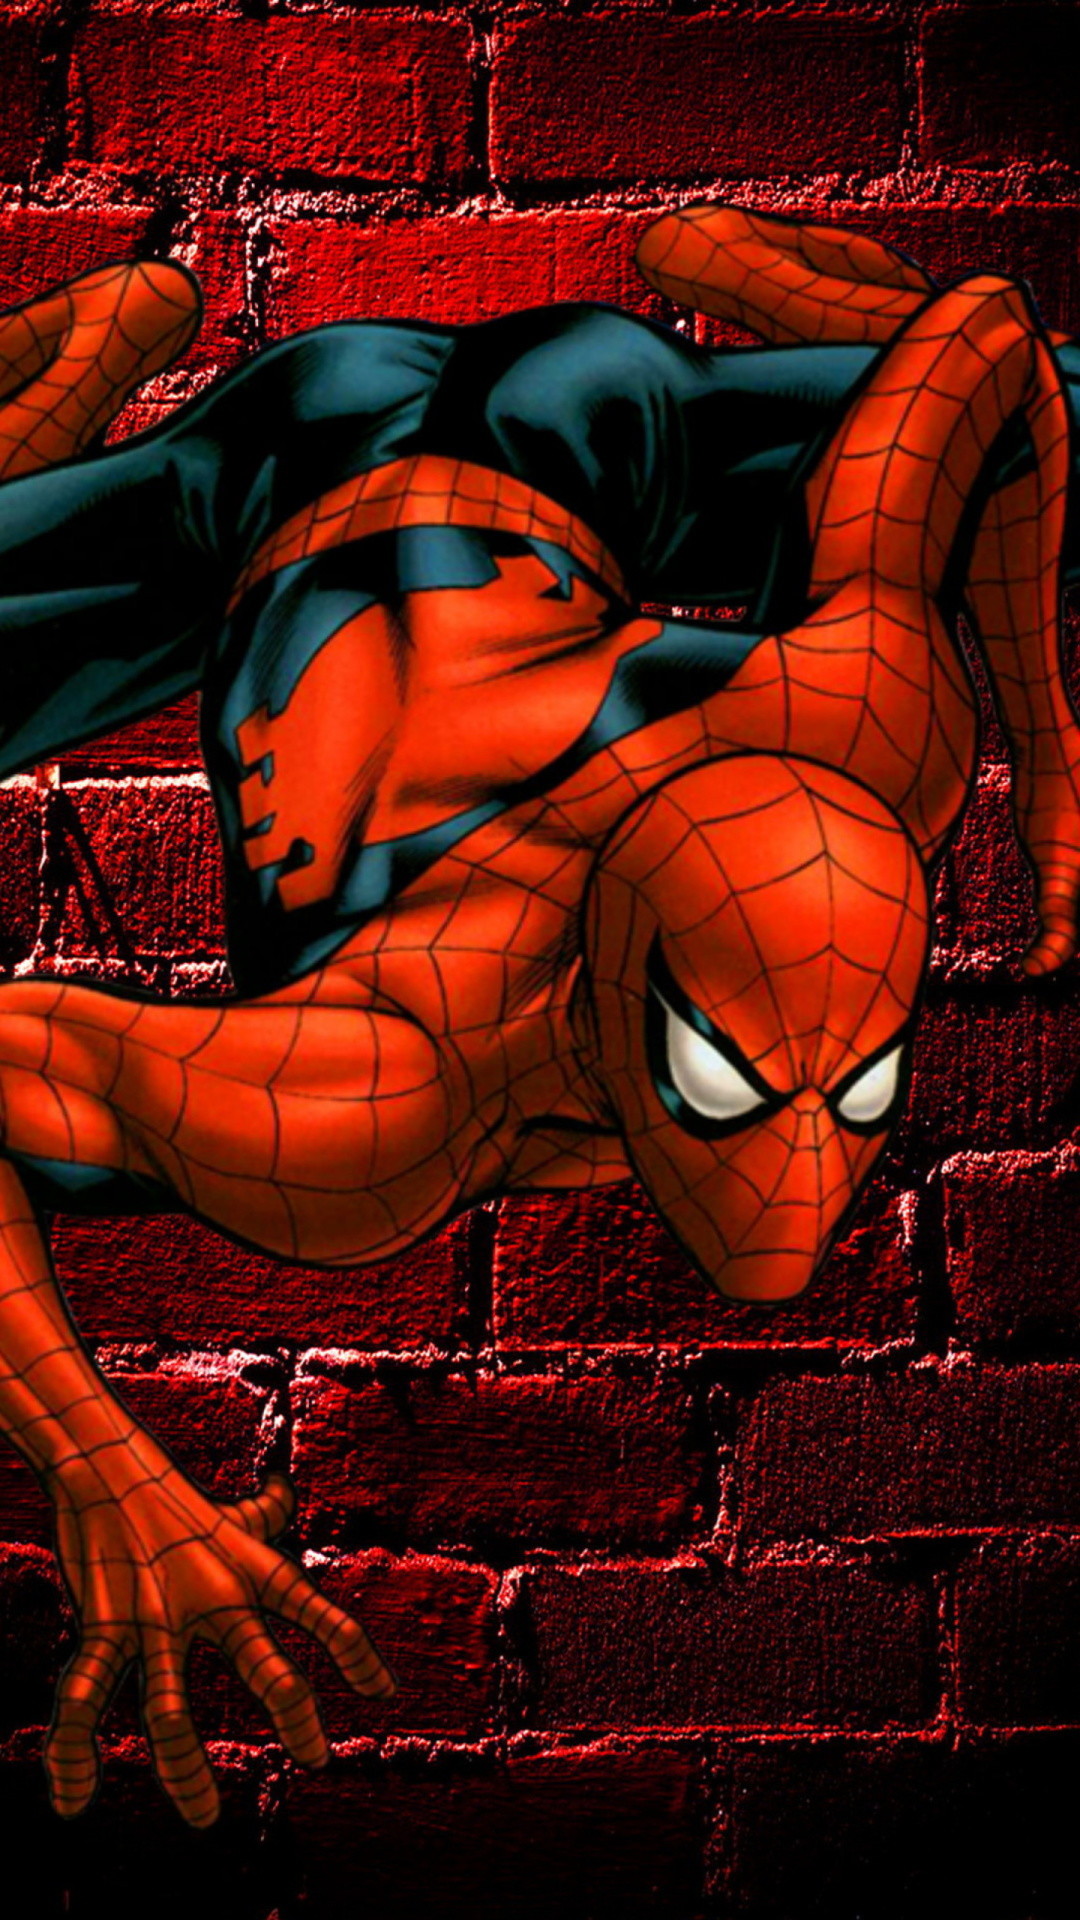 1080x1920 Spiderman On The Wall - Tap to see awesome spider man wallpapers! - @mobile9